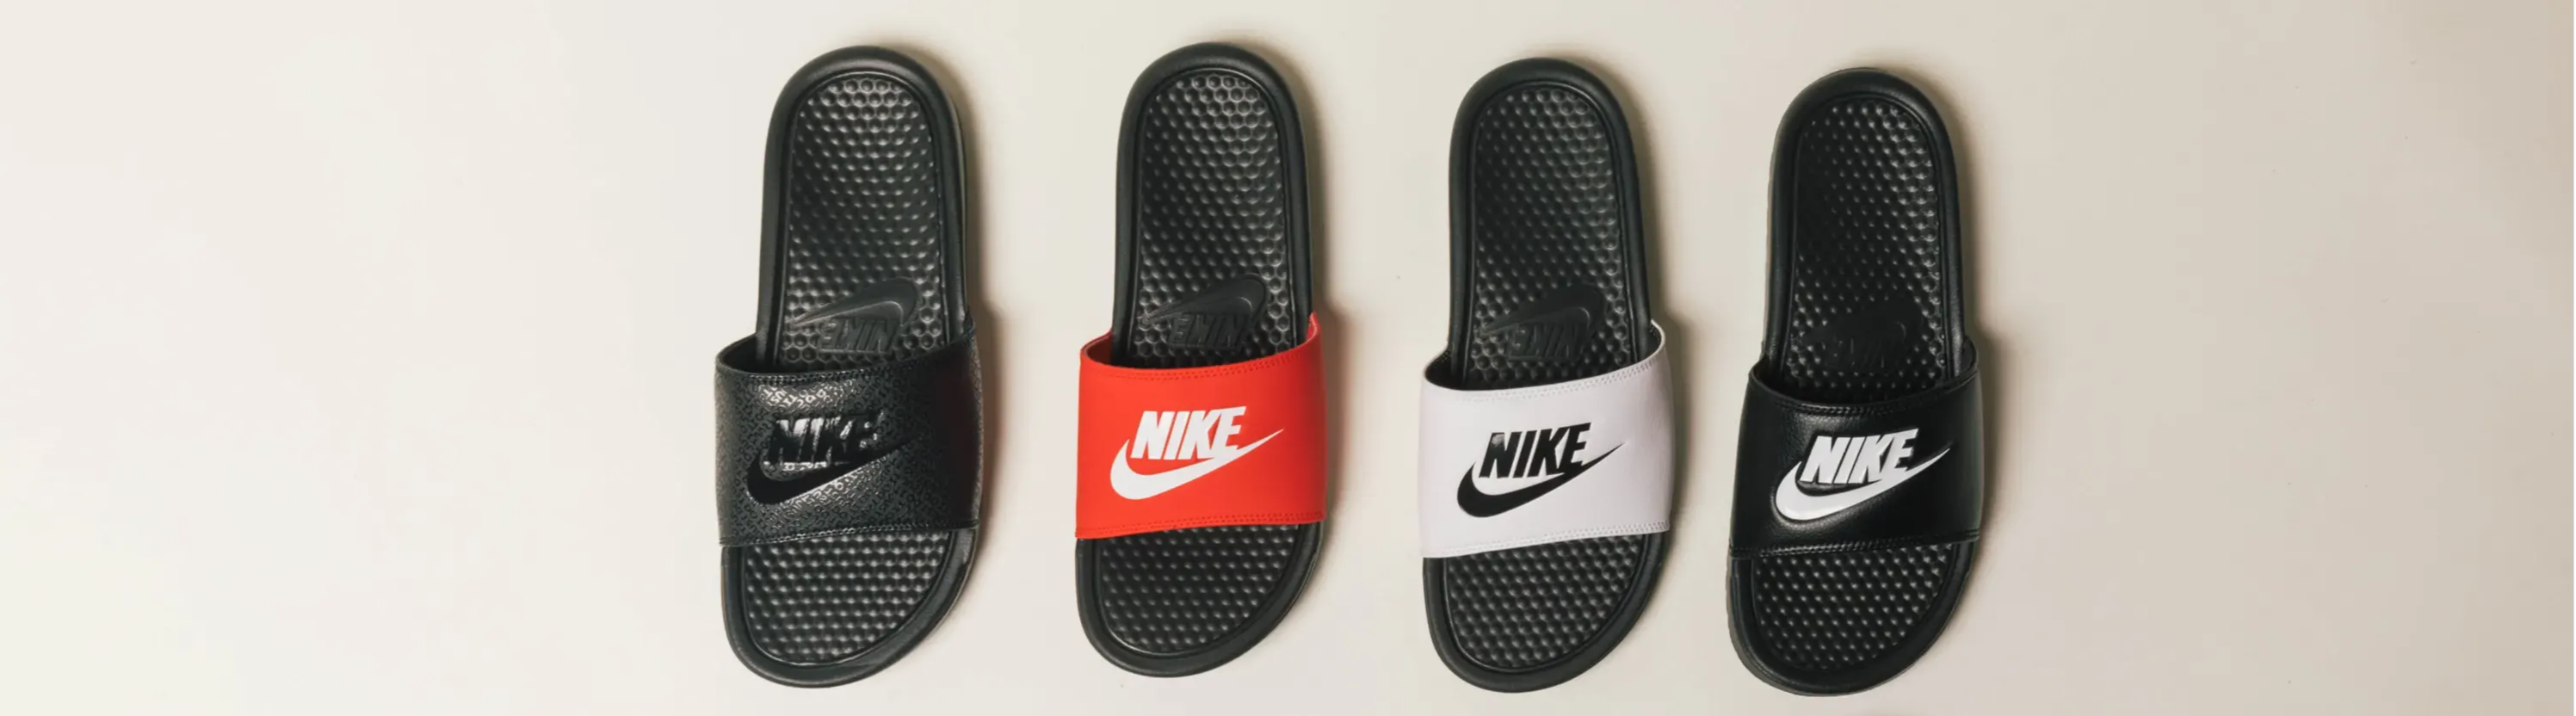 four colors of nike slides top view